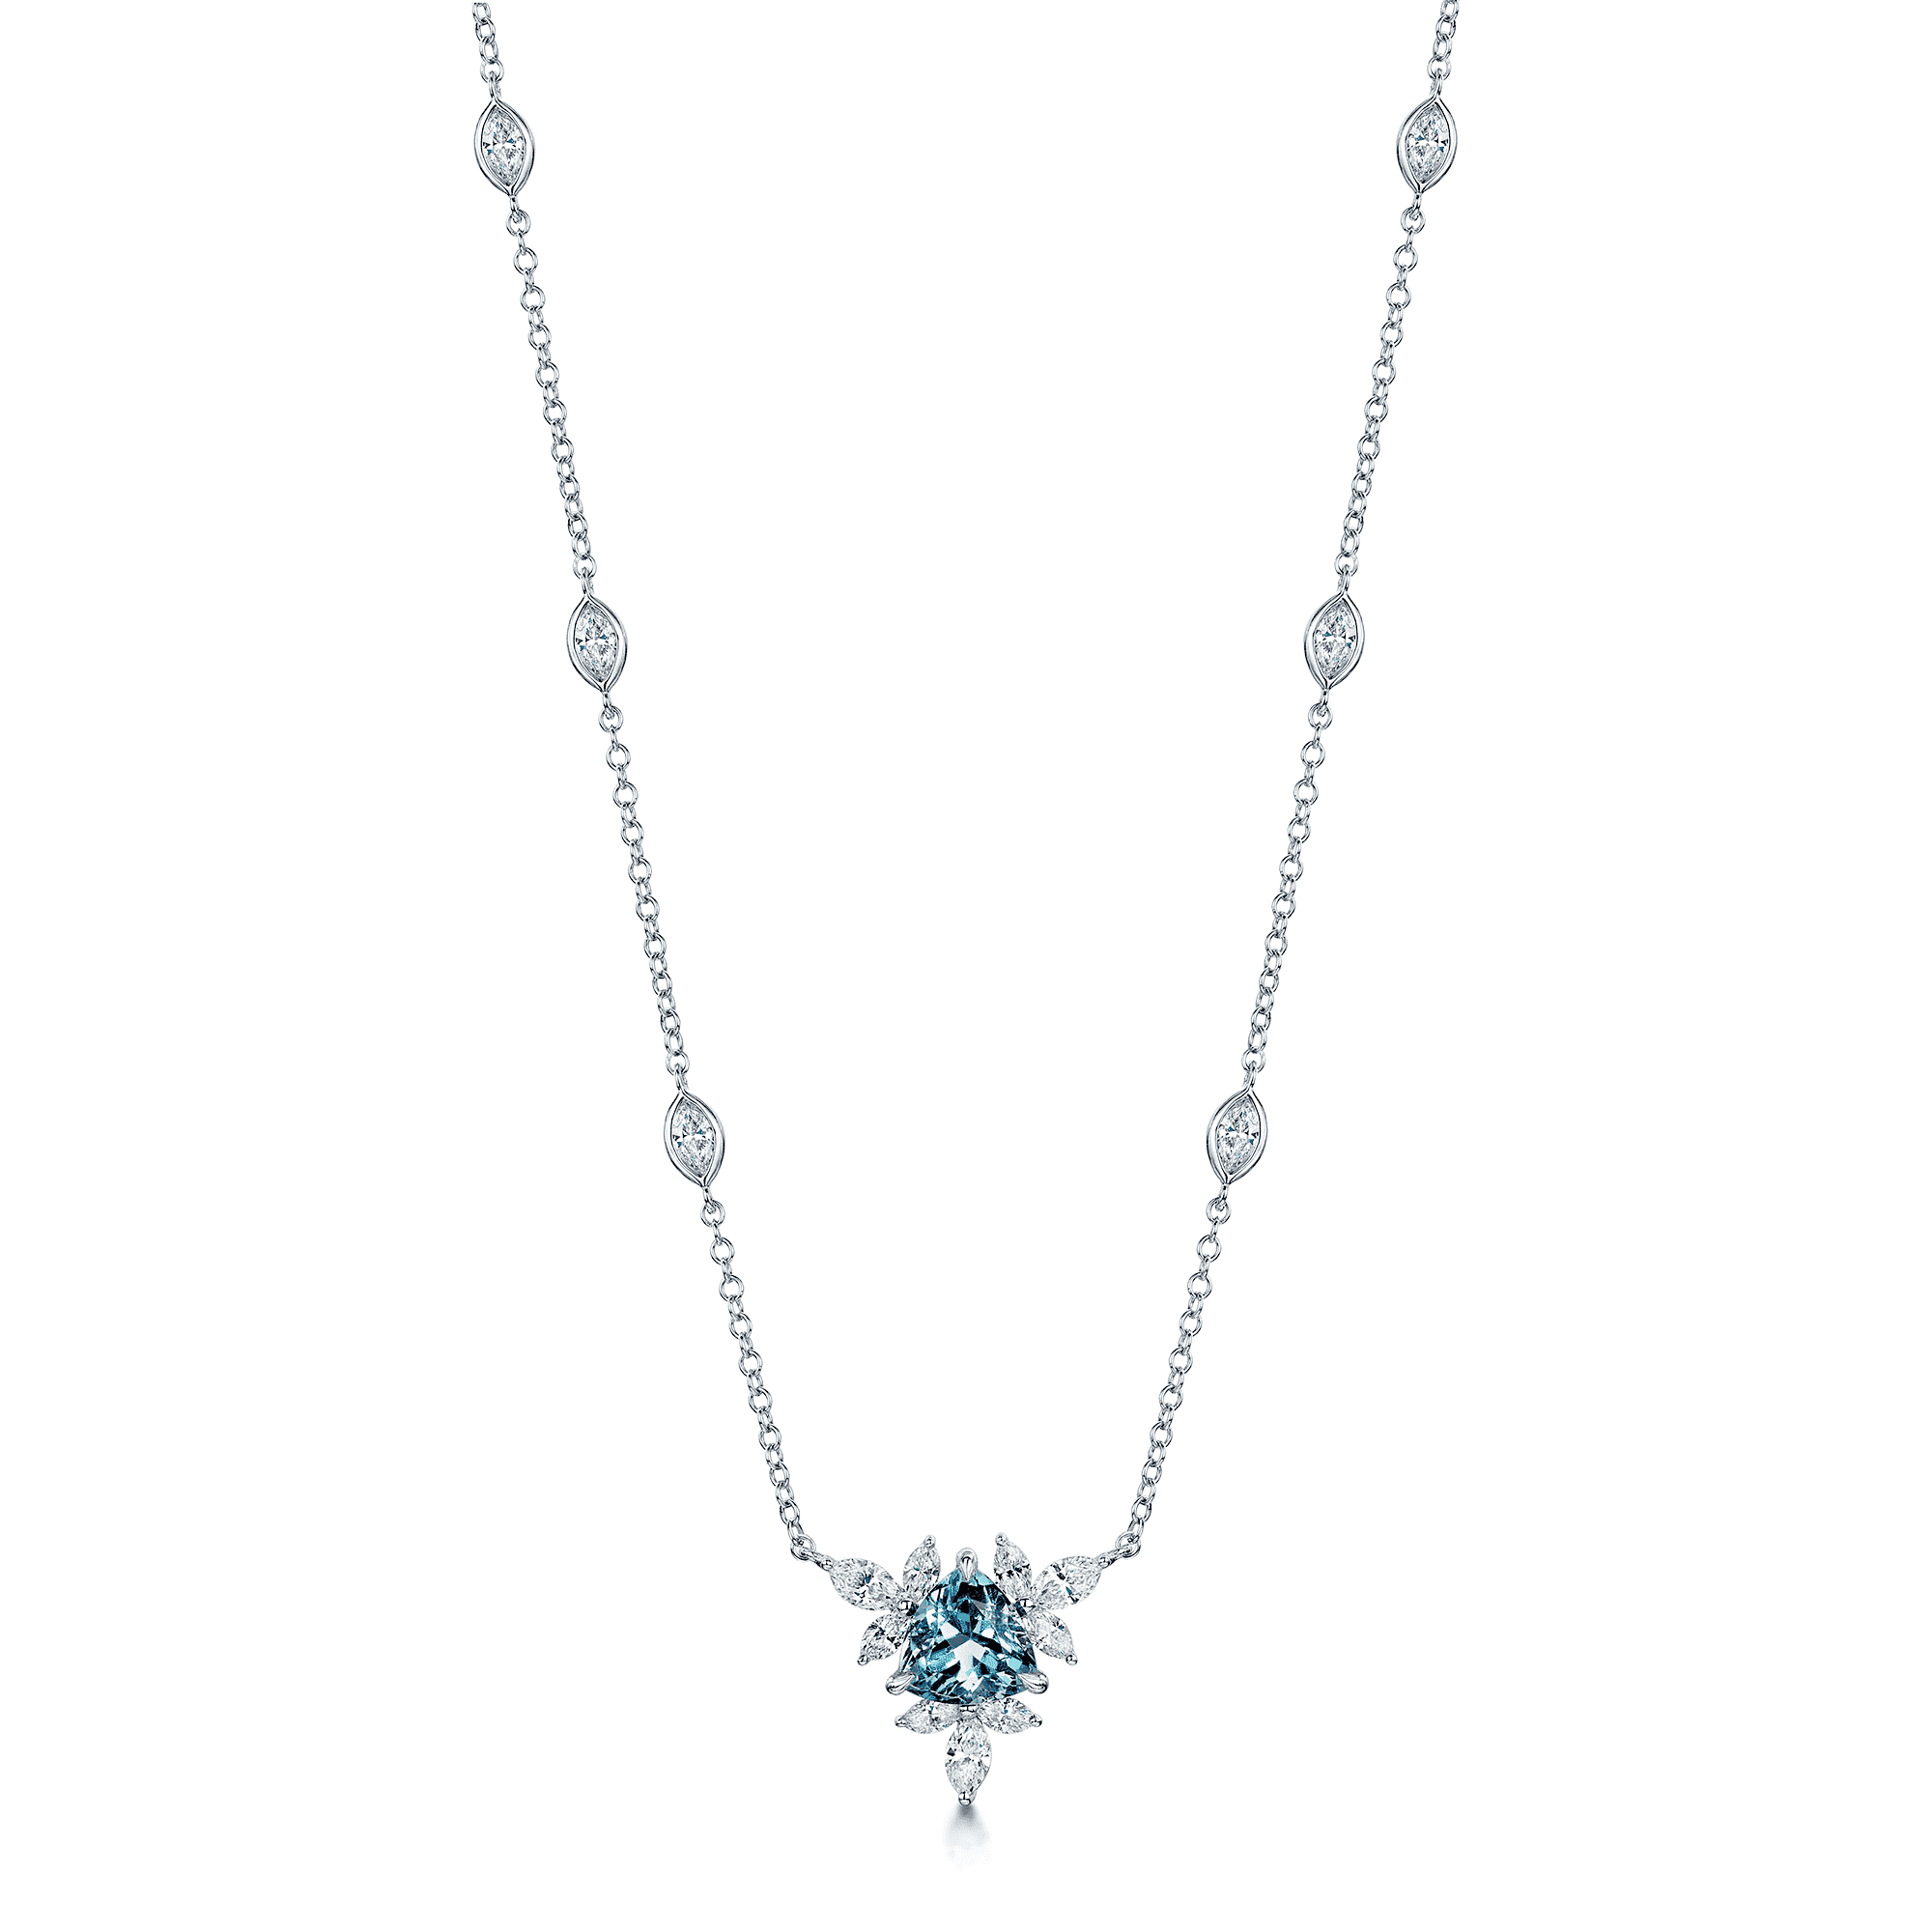 18ct White Gold Trilliant Cut Aquamarine & Marquise Diamond Flower Necklace With Marquise Cut Diamond Set Chain